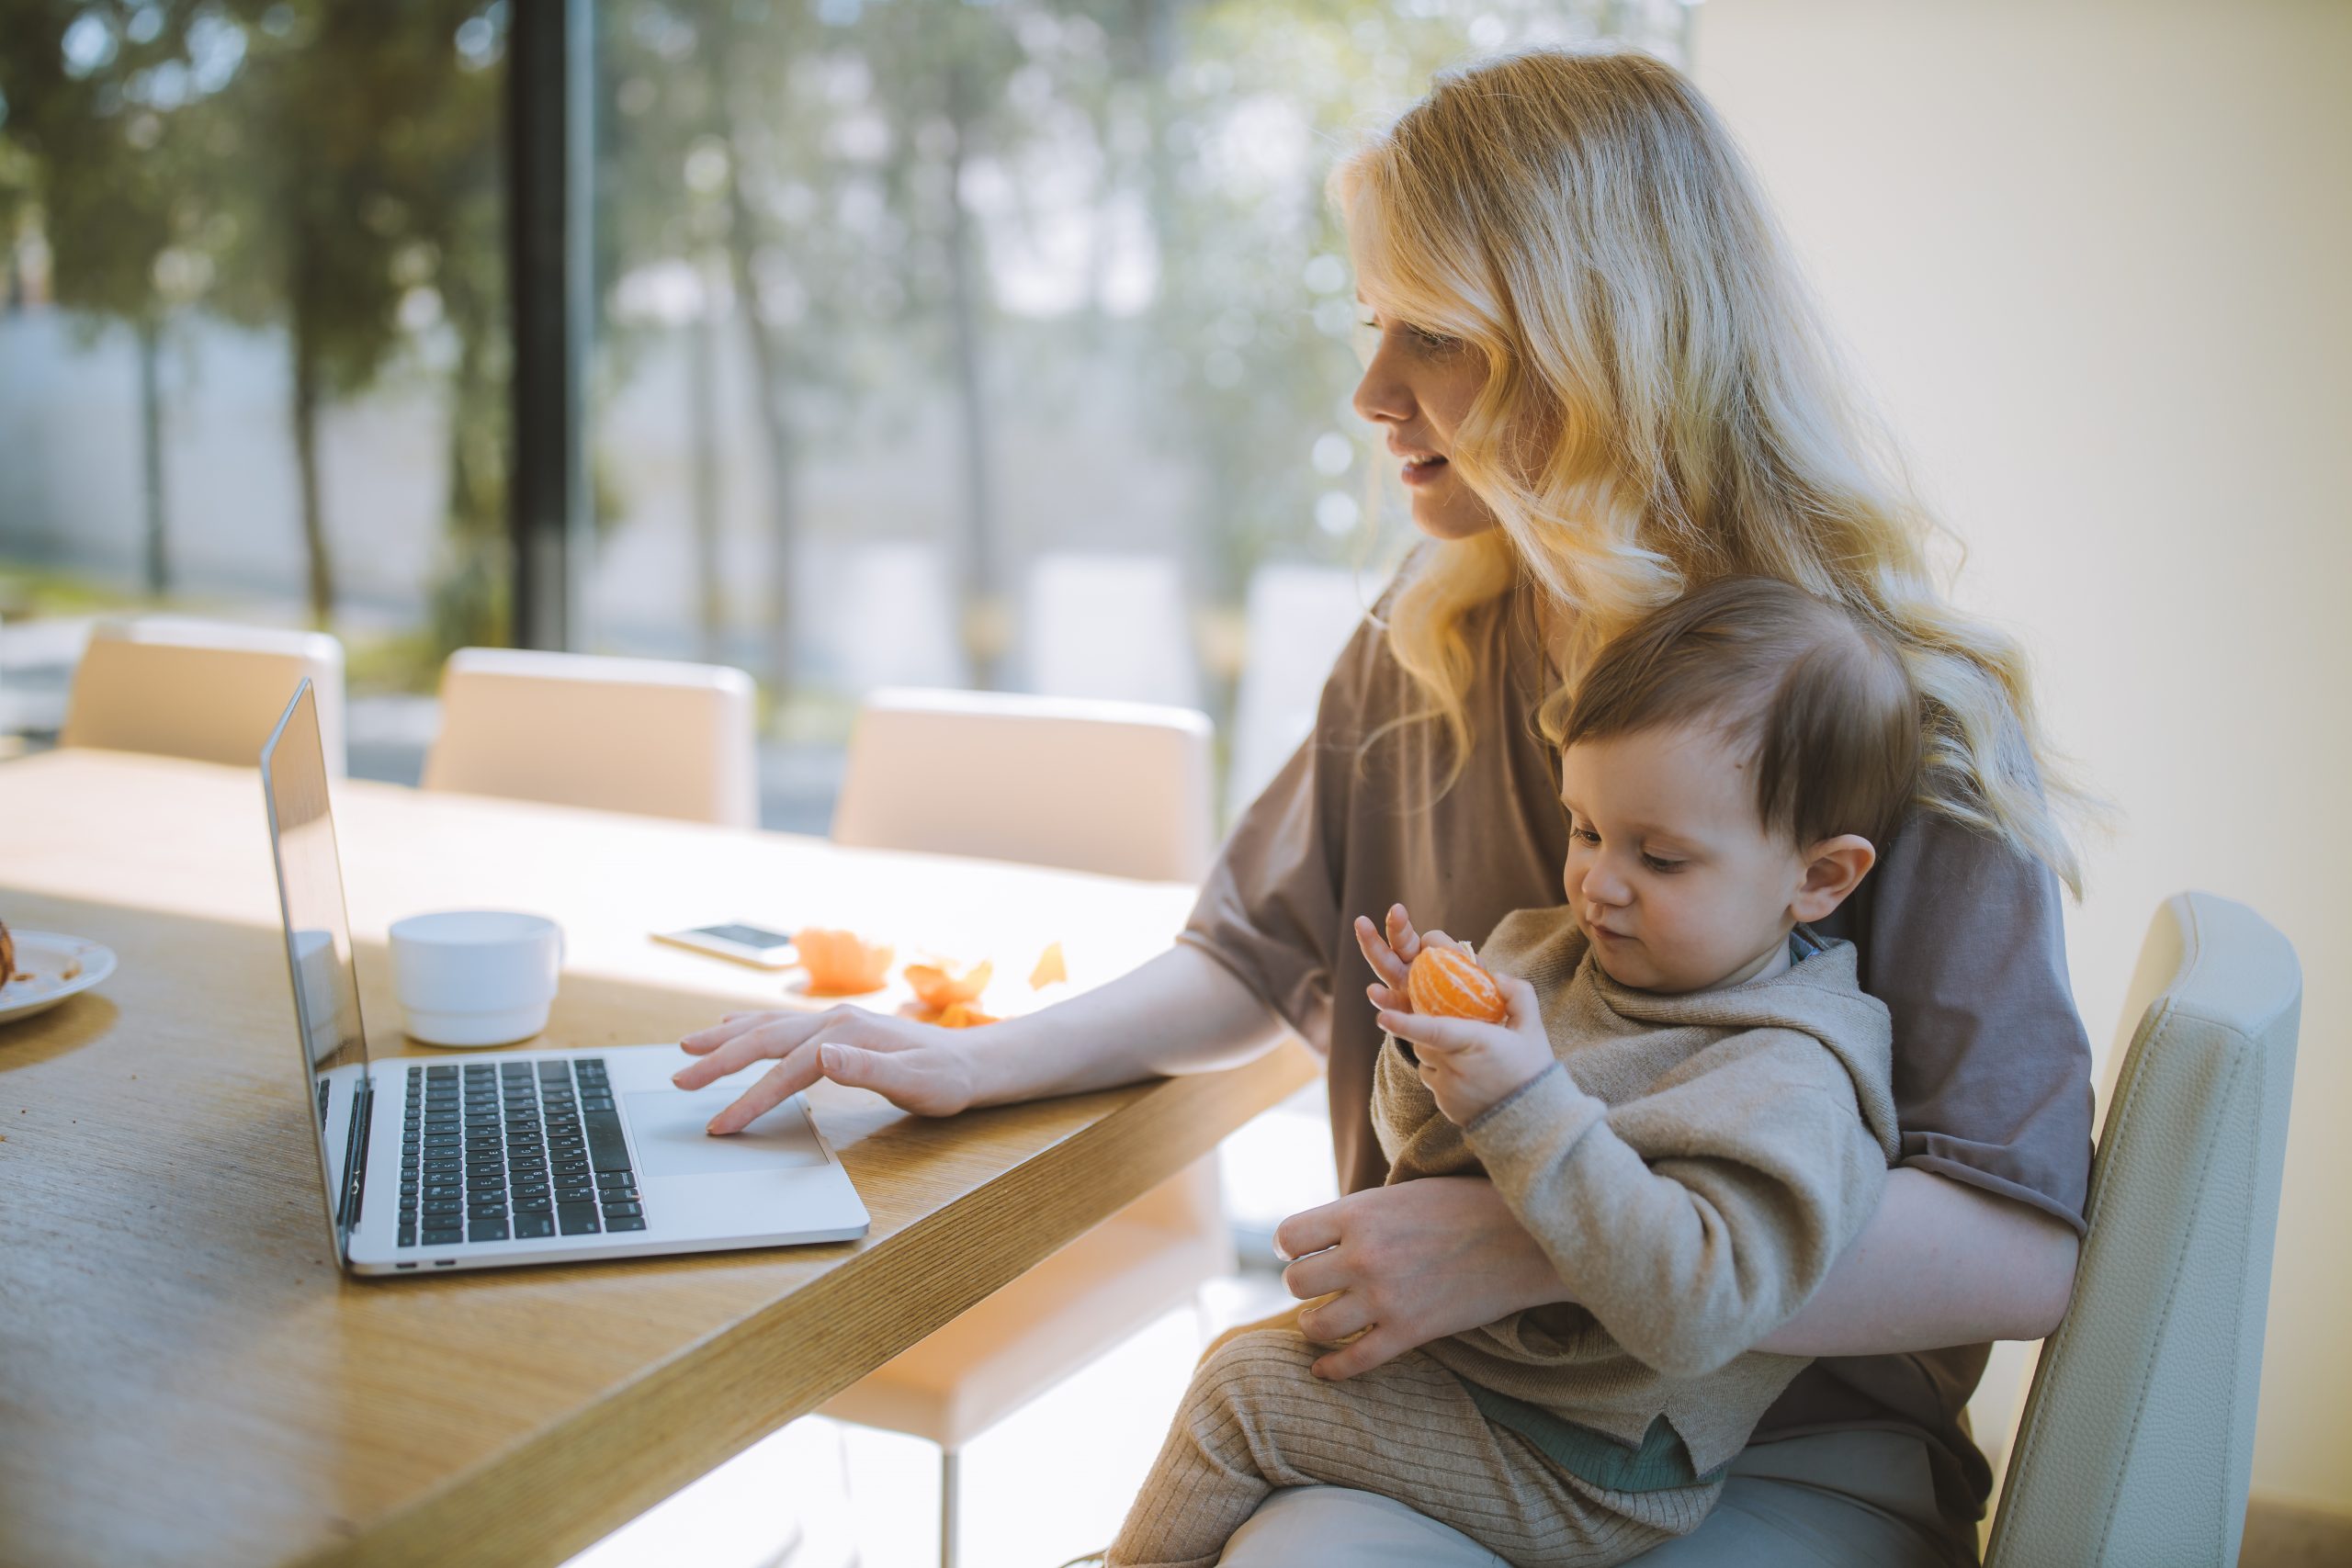 woman at table on laptop holding child eating an orange